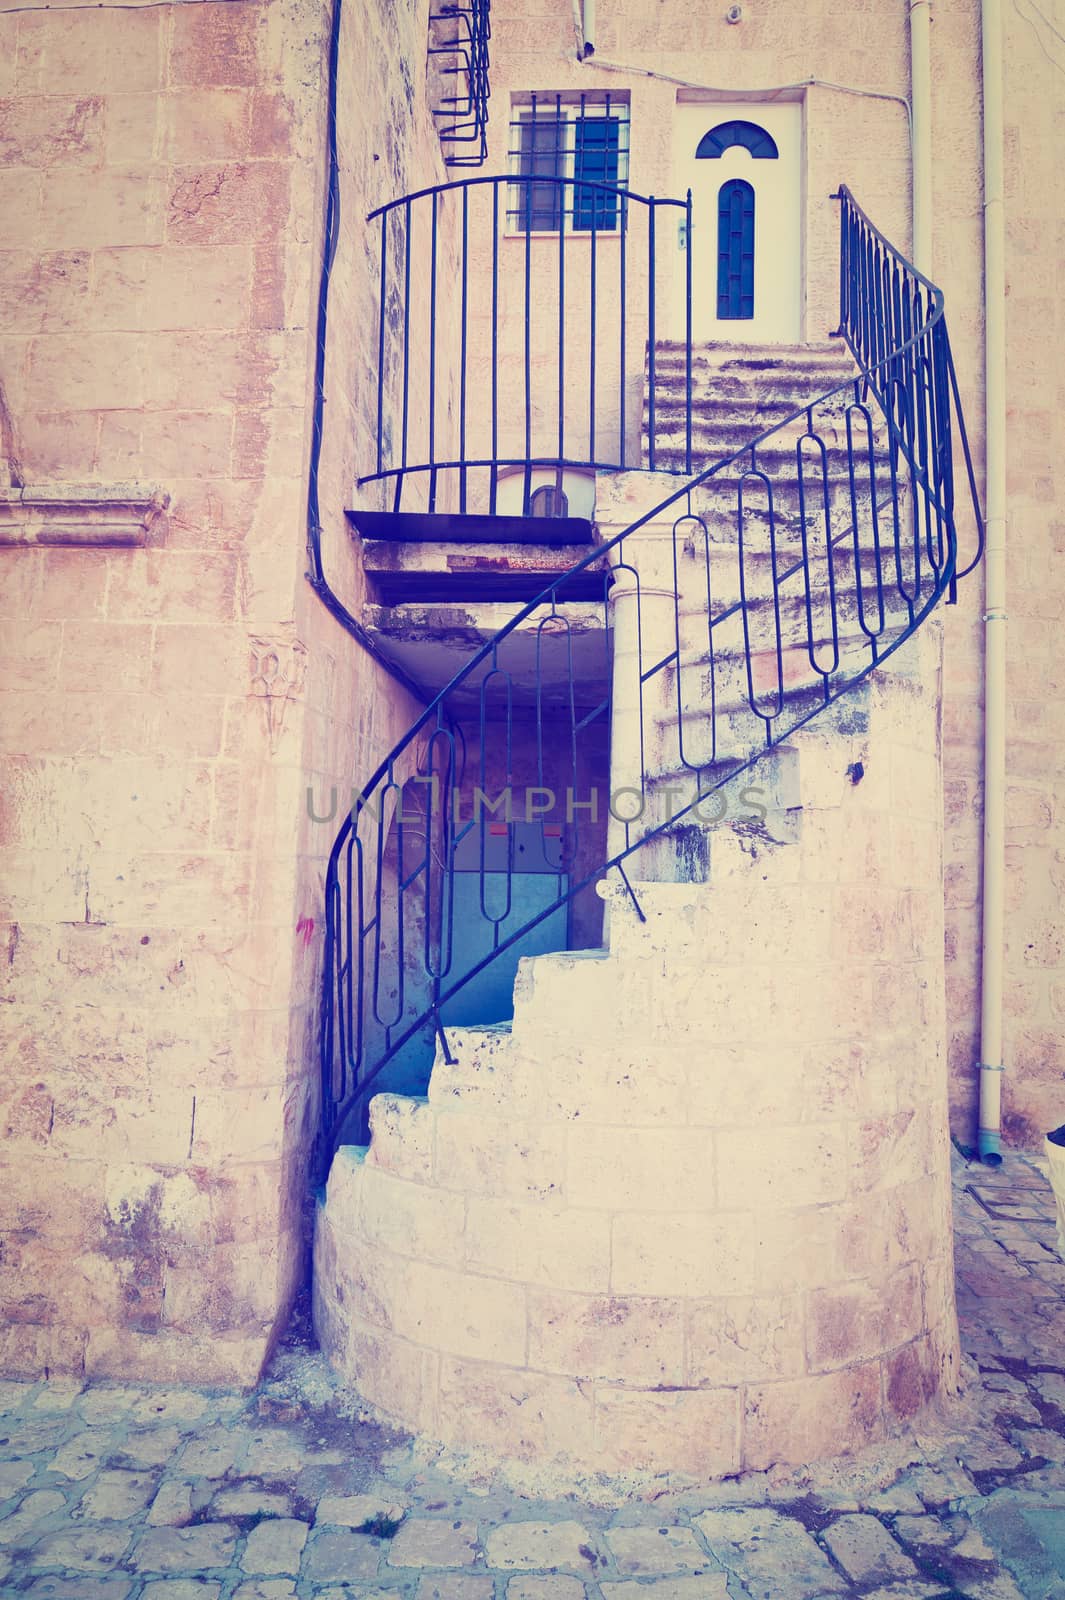 Detail of the Facade of Israel Home in the Armenian Quarter of Jerusalem, Instagram Effect